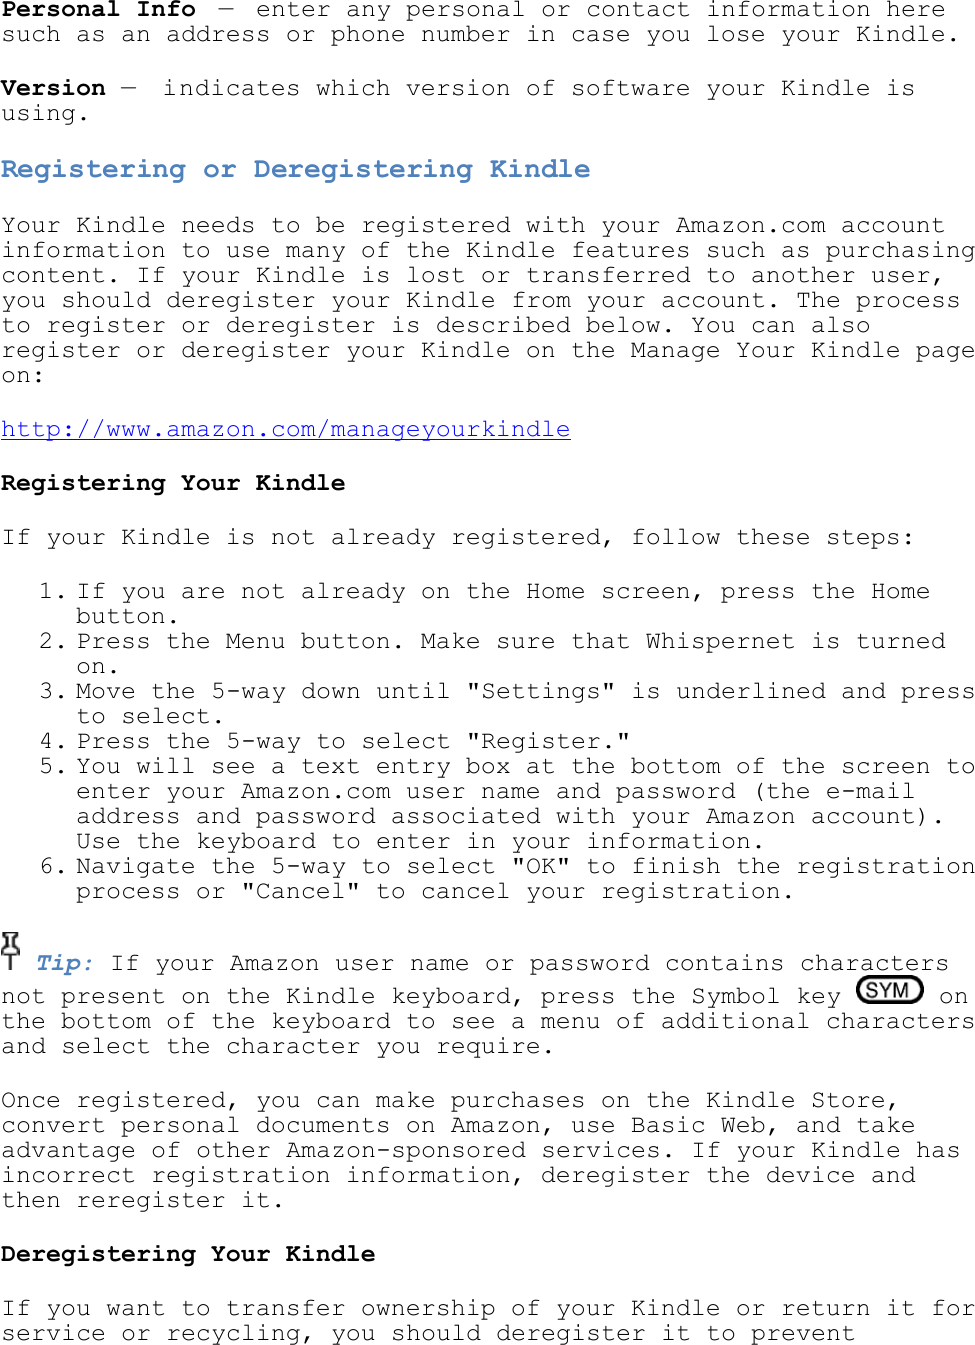   Personal Info — enter any personal or contact information here such as an address or phone number in case you lose your Kindle. Version —  indicates which version of software your Kindle is using. Registering or Deregistering Kindle Your Kindle needs to be registered with your Amazon.com account information to use many of the Kindle features such as purchasing content. If your Kindle is lost or transferred to another user, you should deregister your Kindle from your account. The process to register or deregister is described below. You can also register or deregister your Kindle on the Manage Your Kindle page on: http://www.amazon.com/manageyourkindle Registering Your Kindle If your Kindle is not already registered, follow these steps: 1. If you are not already on the Home screen, press the Home button.  2. Press the Menu button. Make sure that Whispernet is turned on.  3. Move the 5-way down until &quot;Settings&quot; is underlined and press to select.  4. Press the 5-way to select &quot;Register.&quot;  5. You will see a text entry box at the bottom of the screen to enter your Amazon.com user name and password (the e-mail address and password associated with your Amazon account). Use the keyboard to enter in your information.  6. Navigate the 5-way to select &quot;OK&quot; to finish the registration process or &quot;Cancel&quot; to cancel your registration.   Tip: If your Amazon user name or password contains characters not present on the Kindle keyboard, press the Symbol key   on the bottom of the keyboard to see a menu of additional characters and select the character you require. Once registered, you can make purchases on the Kindle Store, convert personal documents on Amazon, use Basic Web, and take advantage of other Amazon-sponsored services. If your Kindle has incorrect registration information, deregister the device and then reregister it. Deregistering Your Kindle If you want to transfer ownership of your Kindle or return it for service or recycling, you should deregister it to prevent 